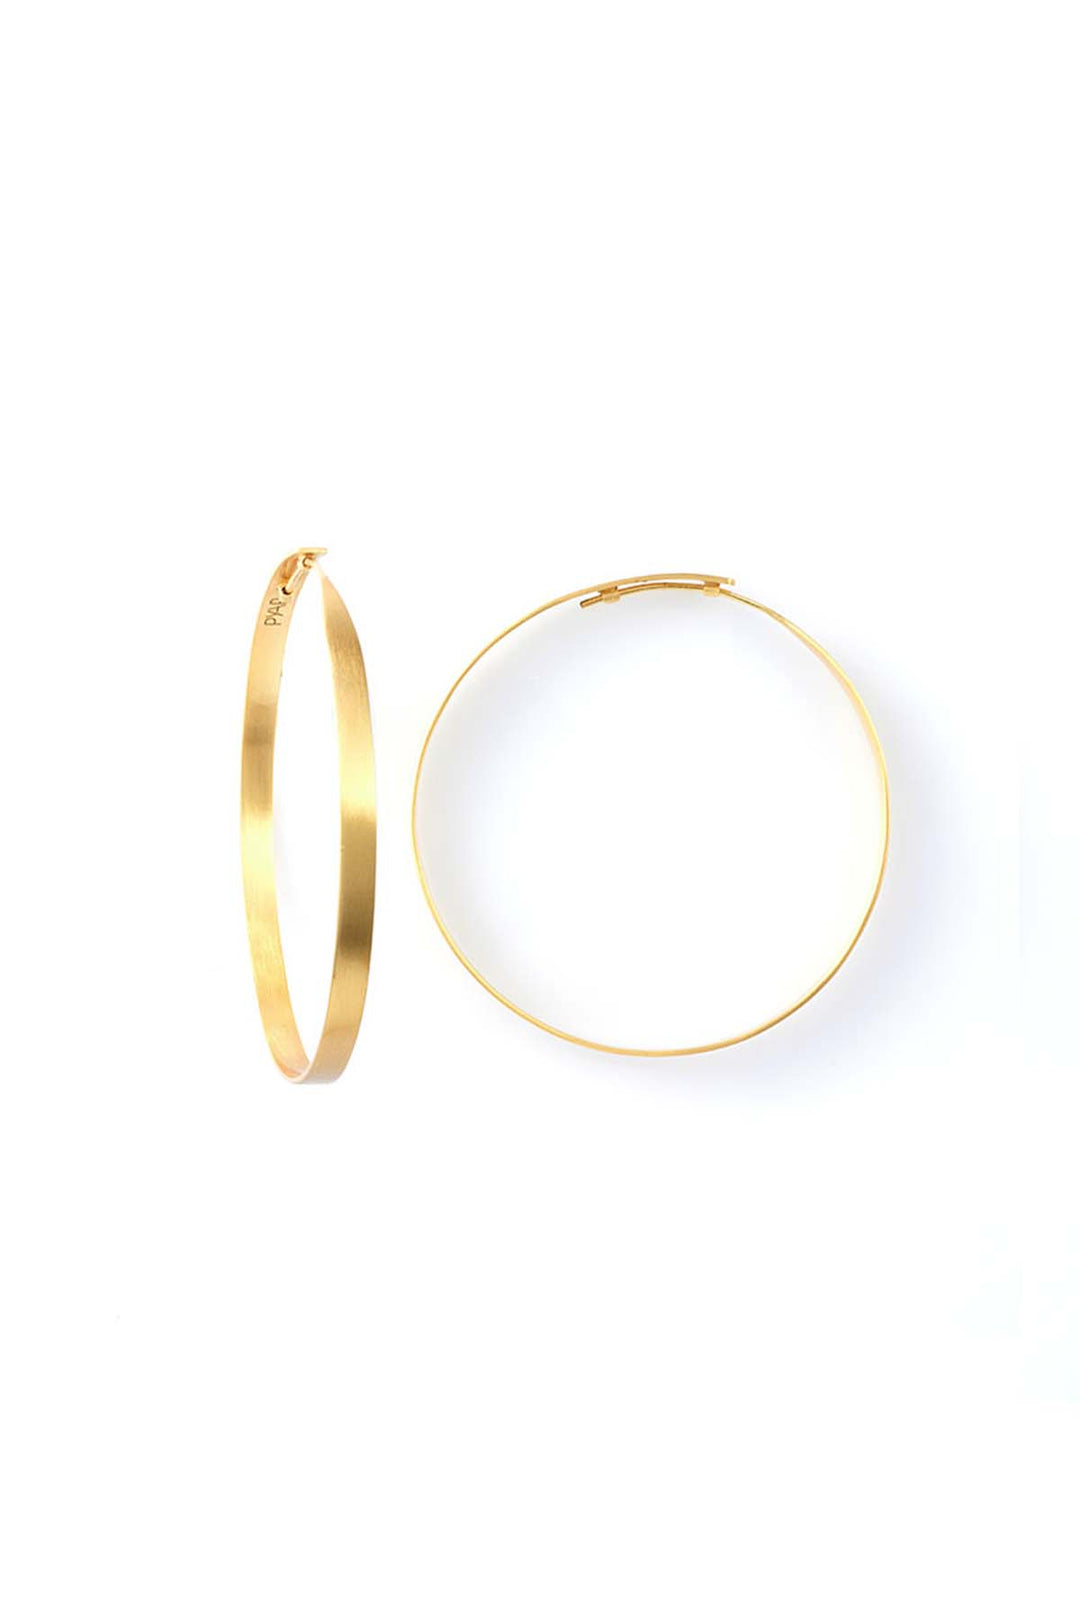 Gold Hoop Earrings Extra Small